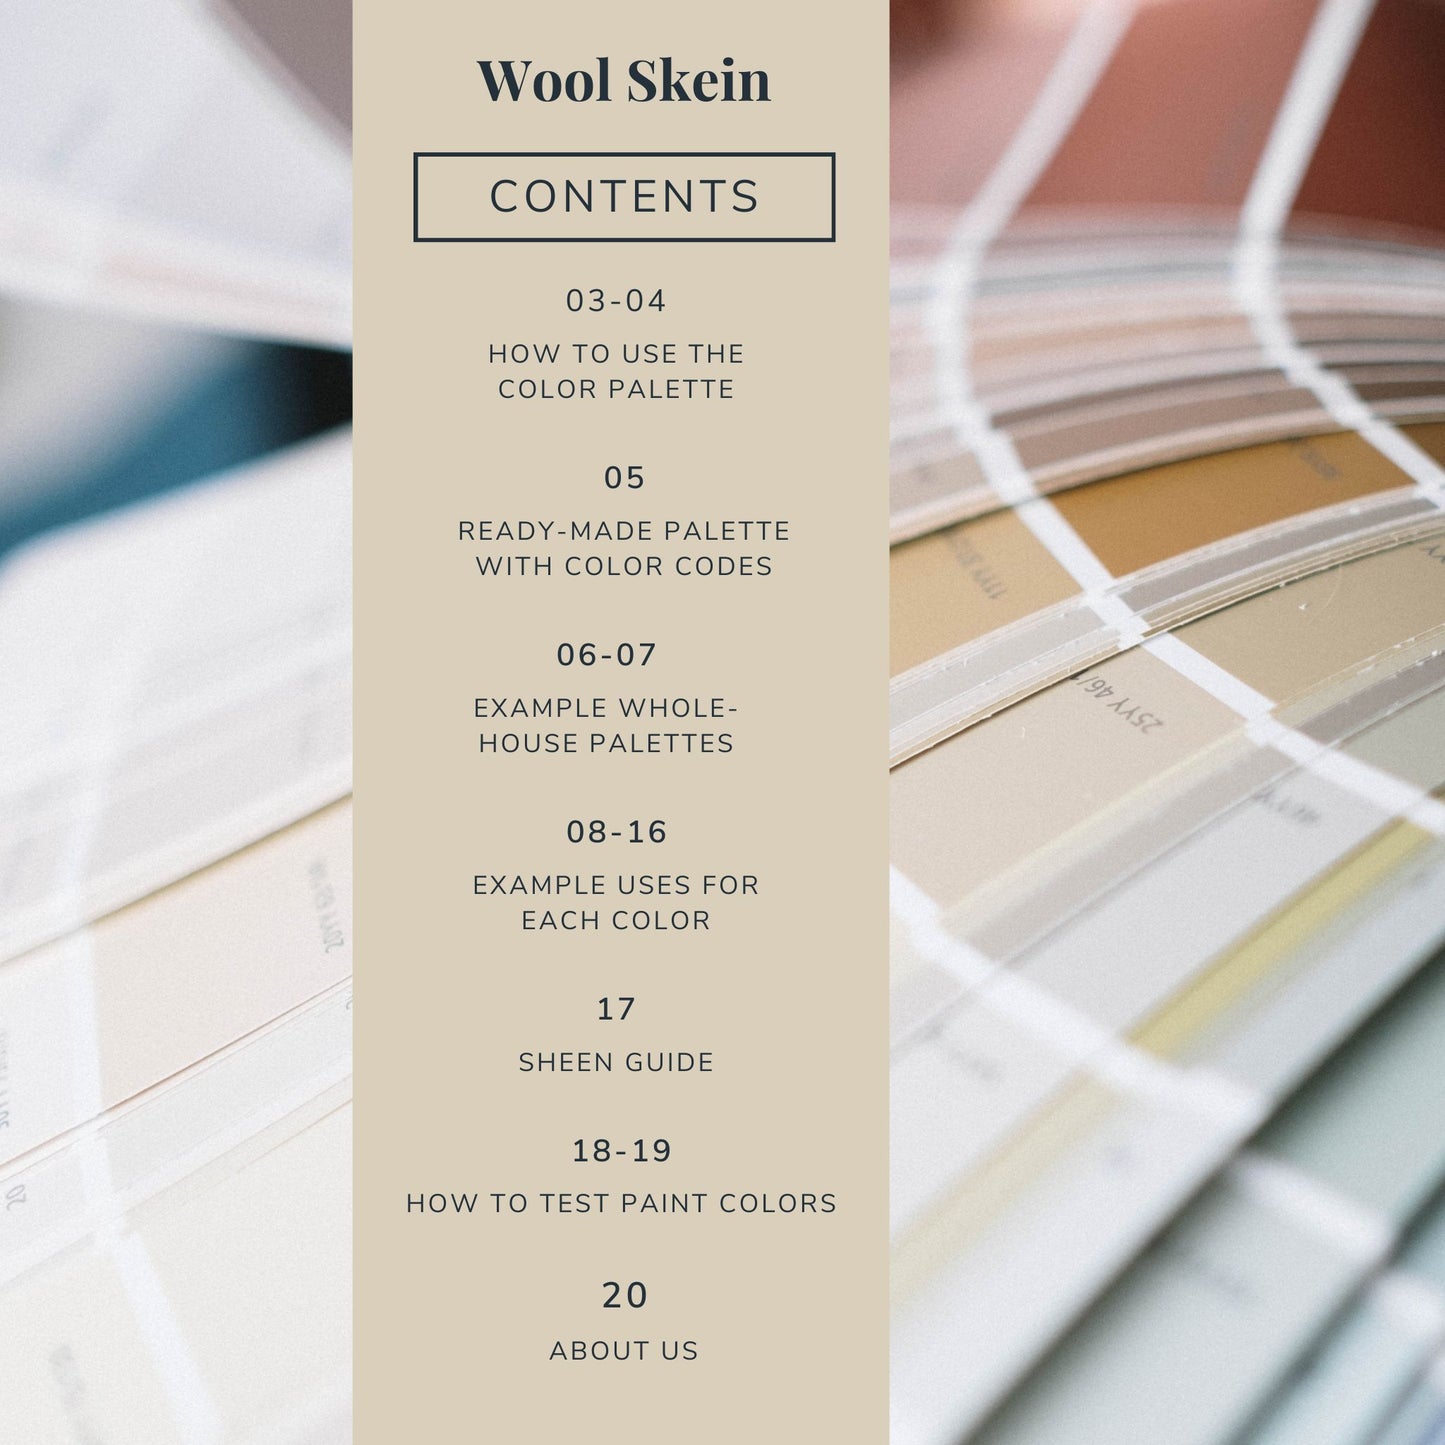 Contents list for a Sherwin-Williams Wool Skein color palette guide